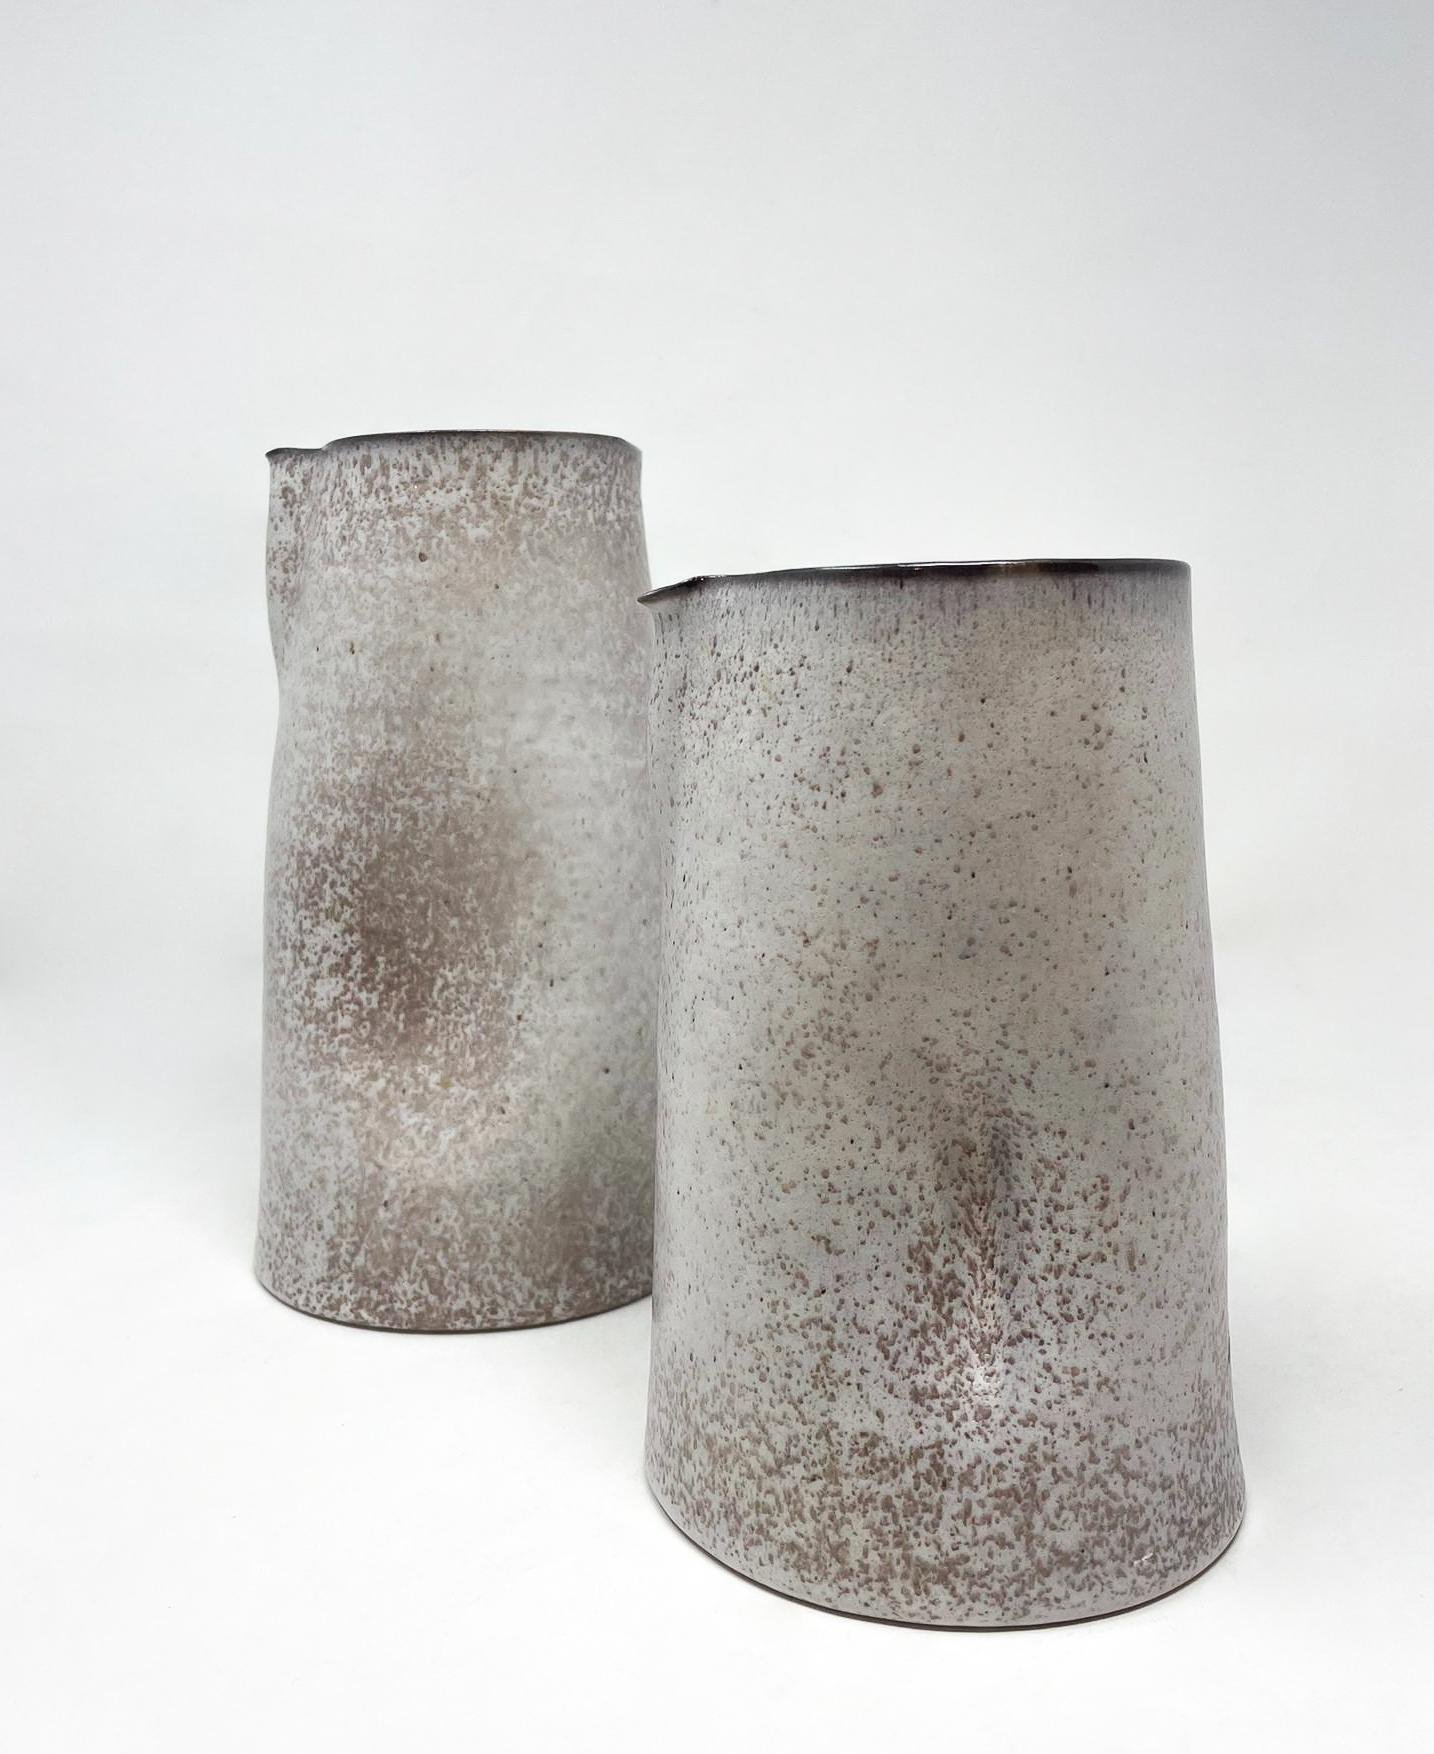 Mid-Century Modern Pair of Ceramic Pitchers by Alessio Tasca, 1970s, Italy For Sale 1